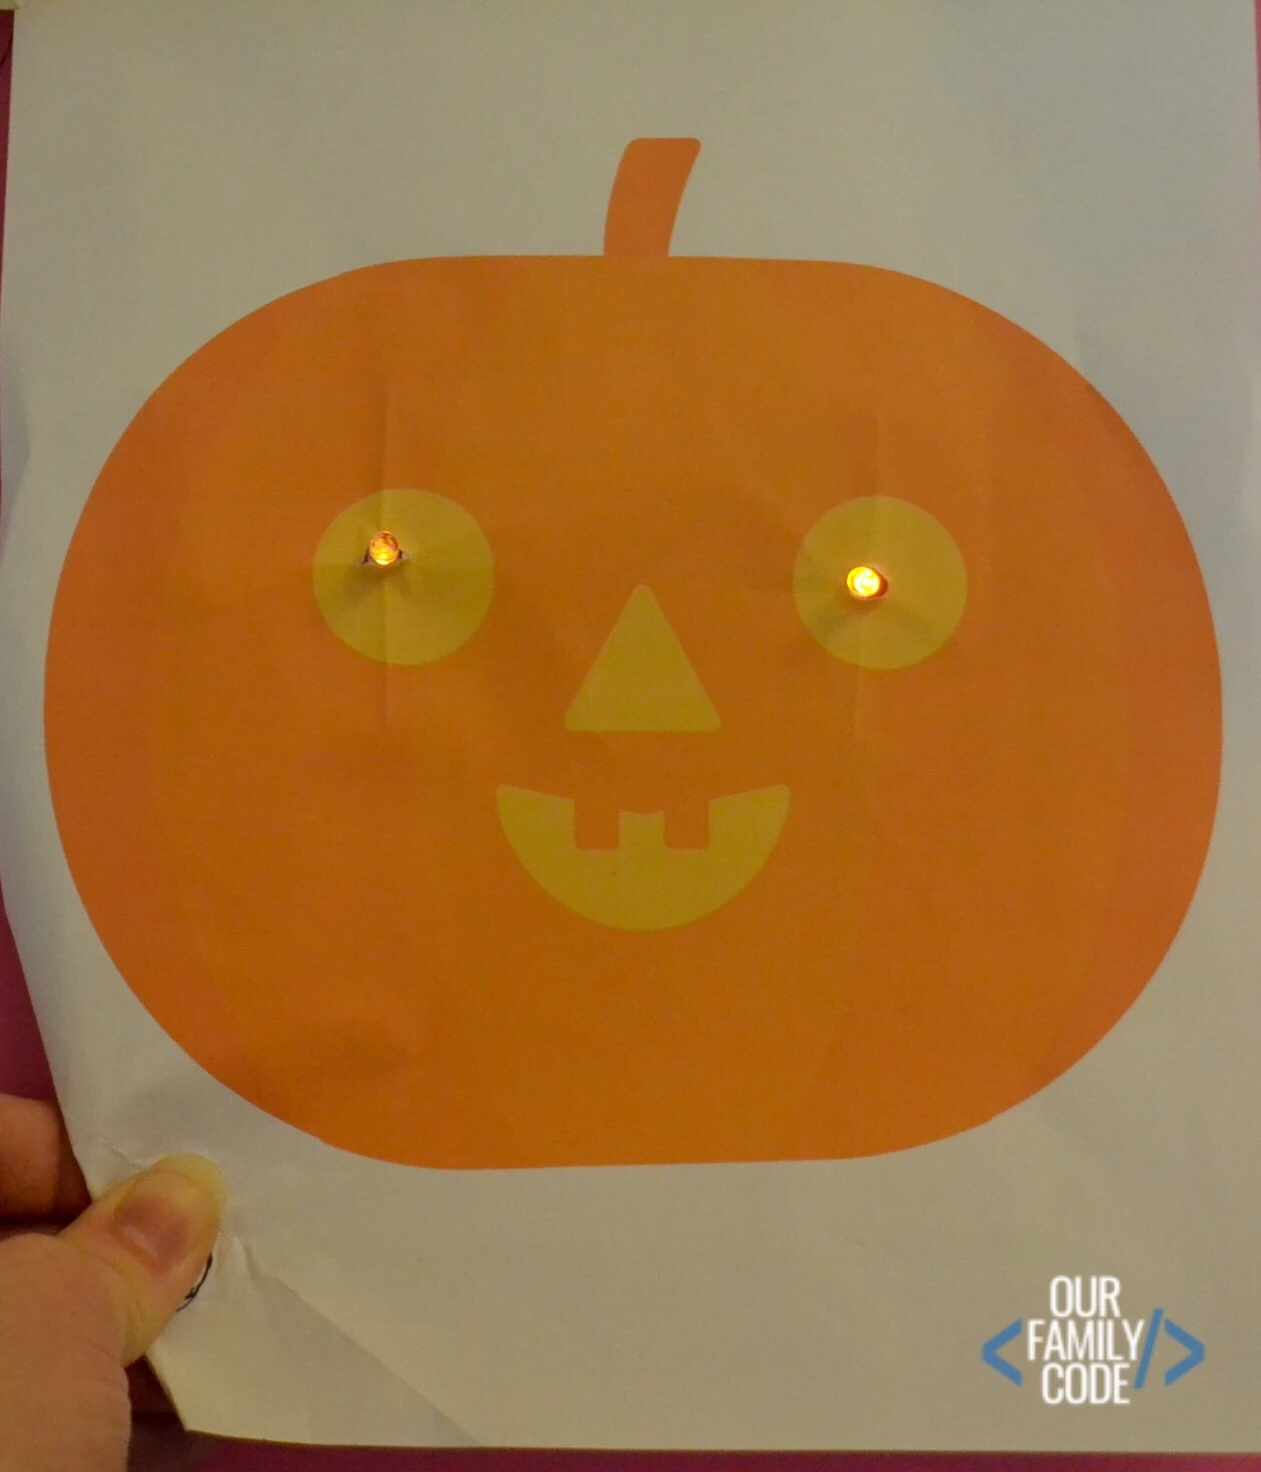 This paper circuit pumpkin Halloween STEAM activity is a great way to learn about simple circuits and parallel circuits and then apply that circuitry knowledge with some artistic flair to make pumpkin paper circuits! 